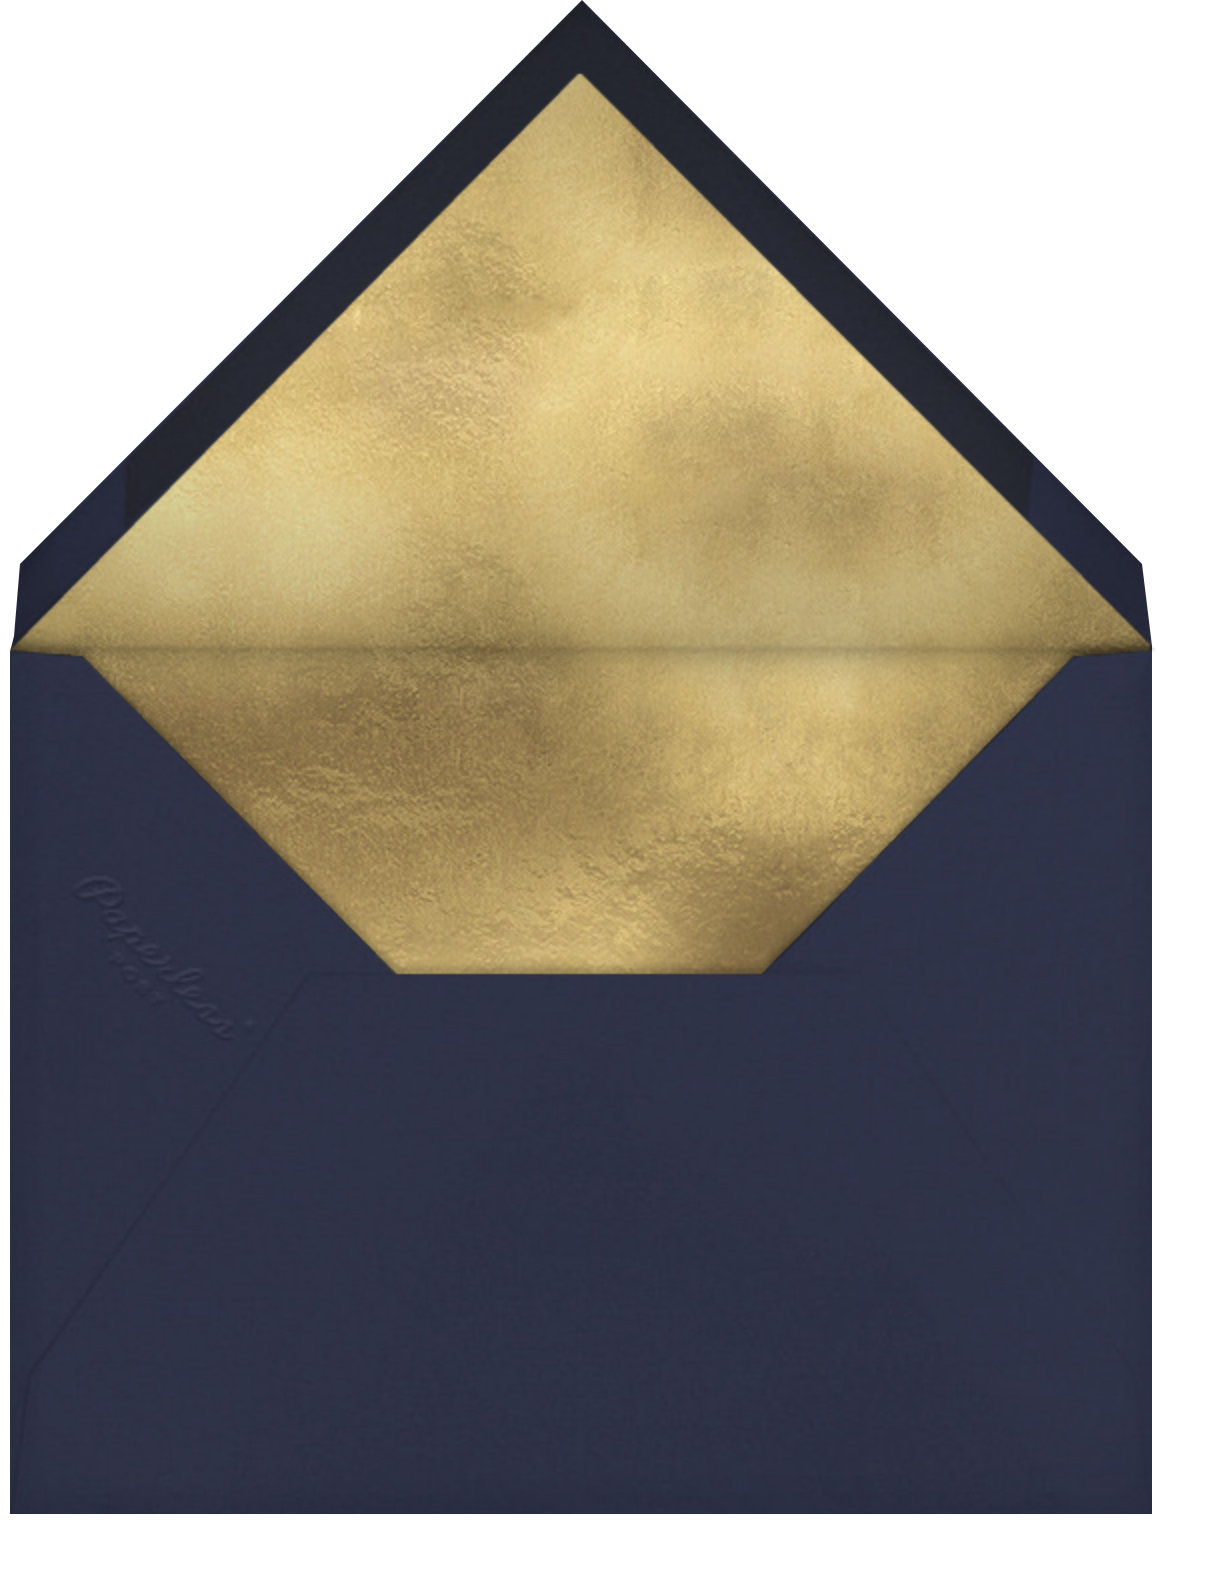 Featured Thanks (Photo) - Coral - Paperless Post - Envelope